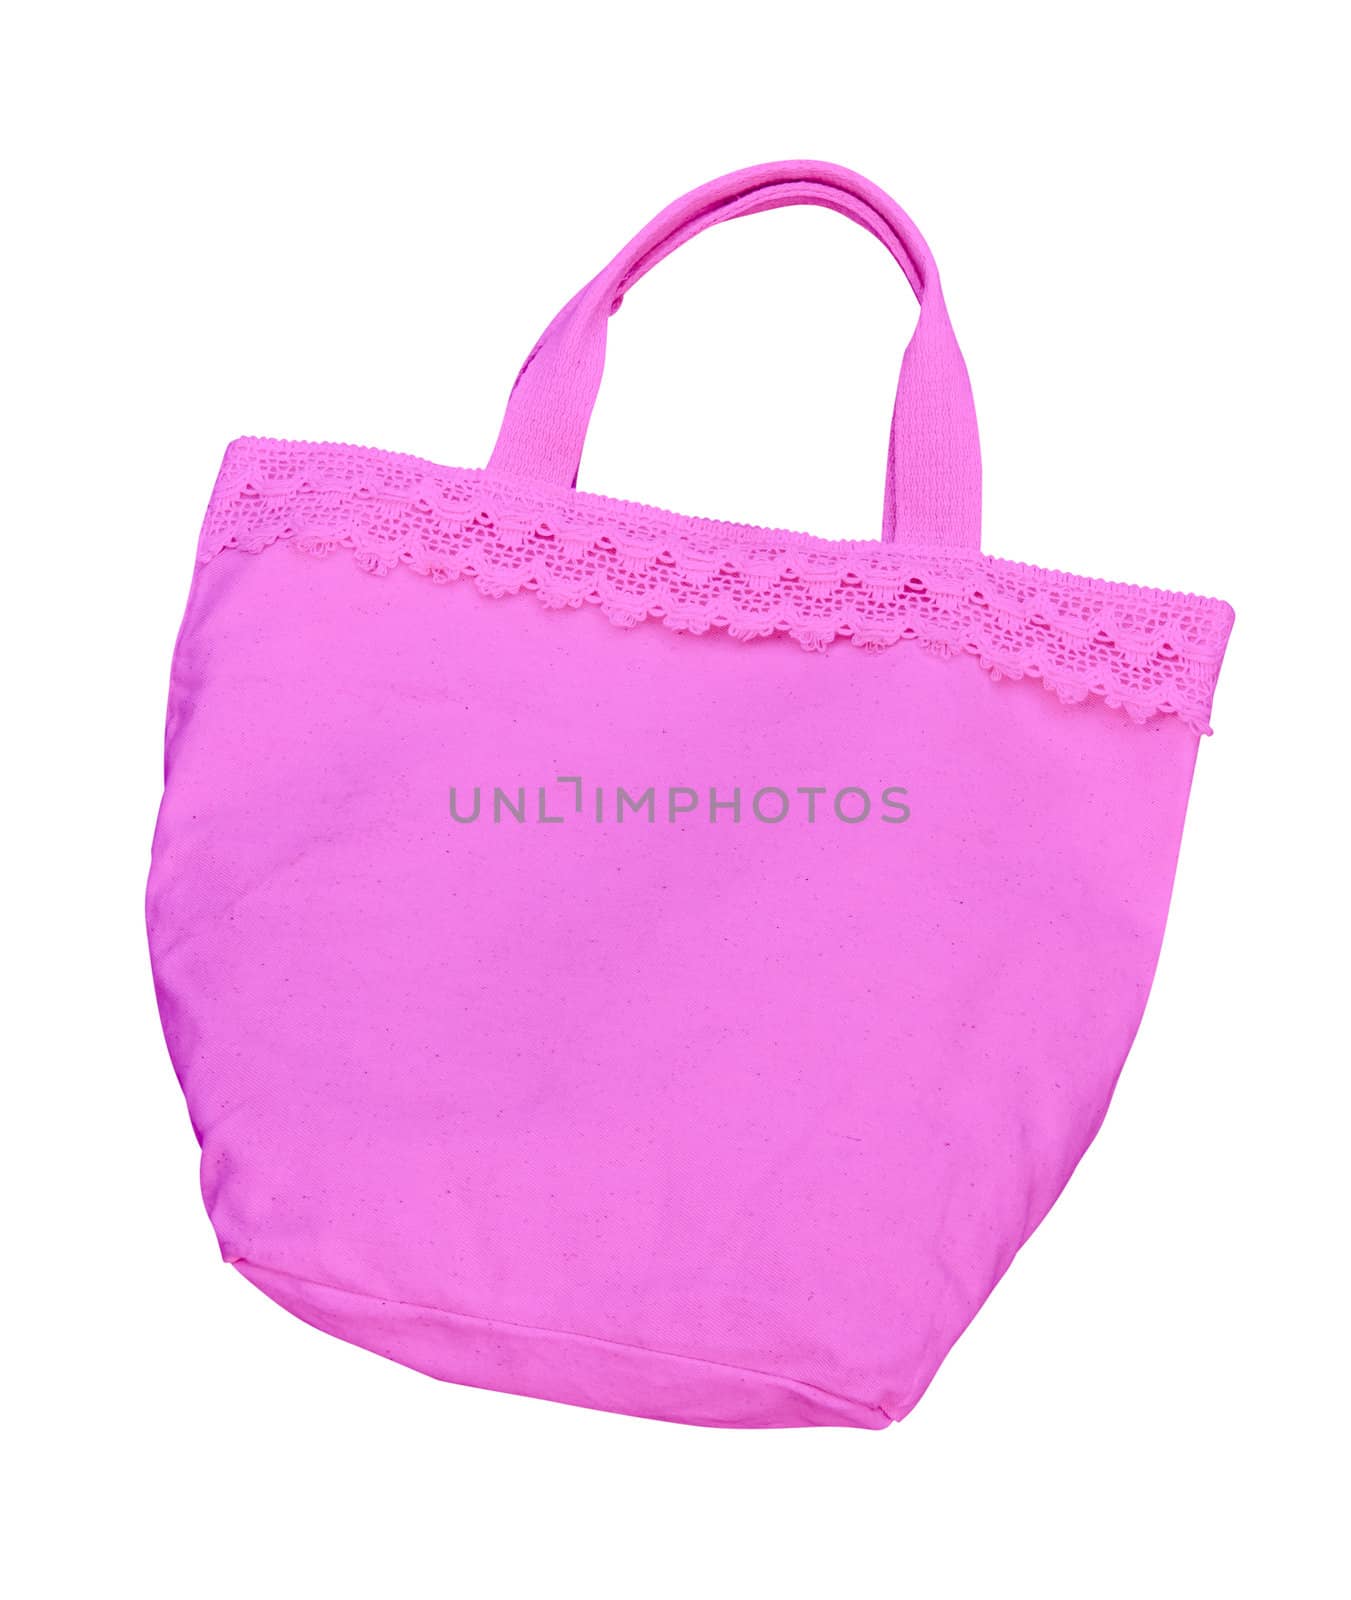 pink cotton bag isolated with clipping path by tungphoto